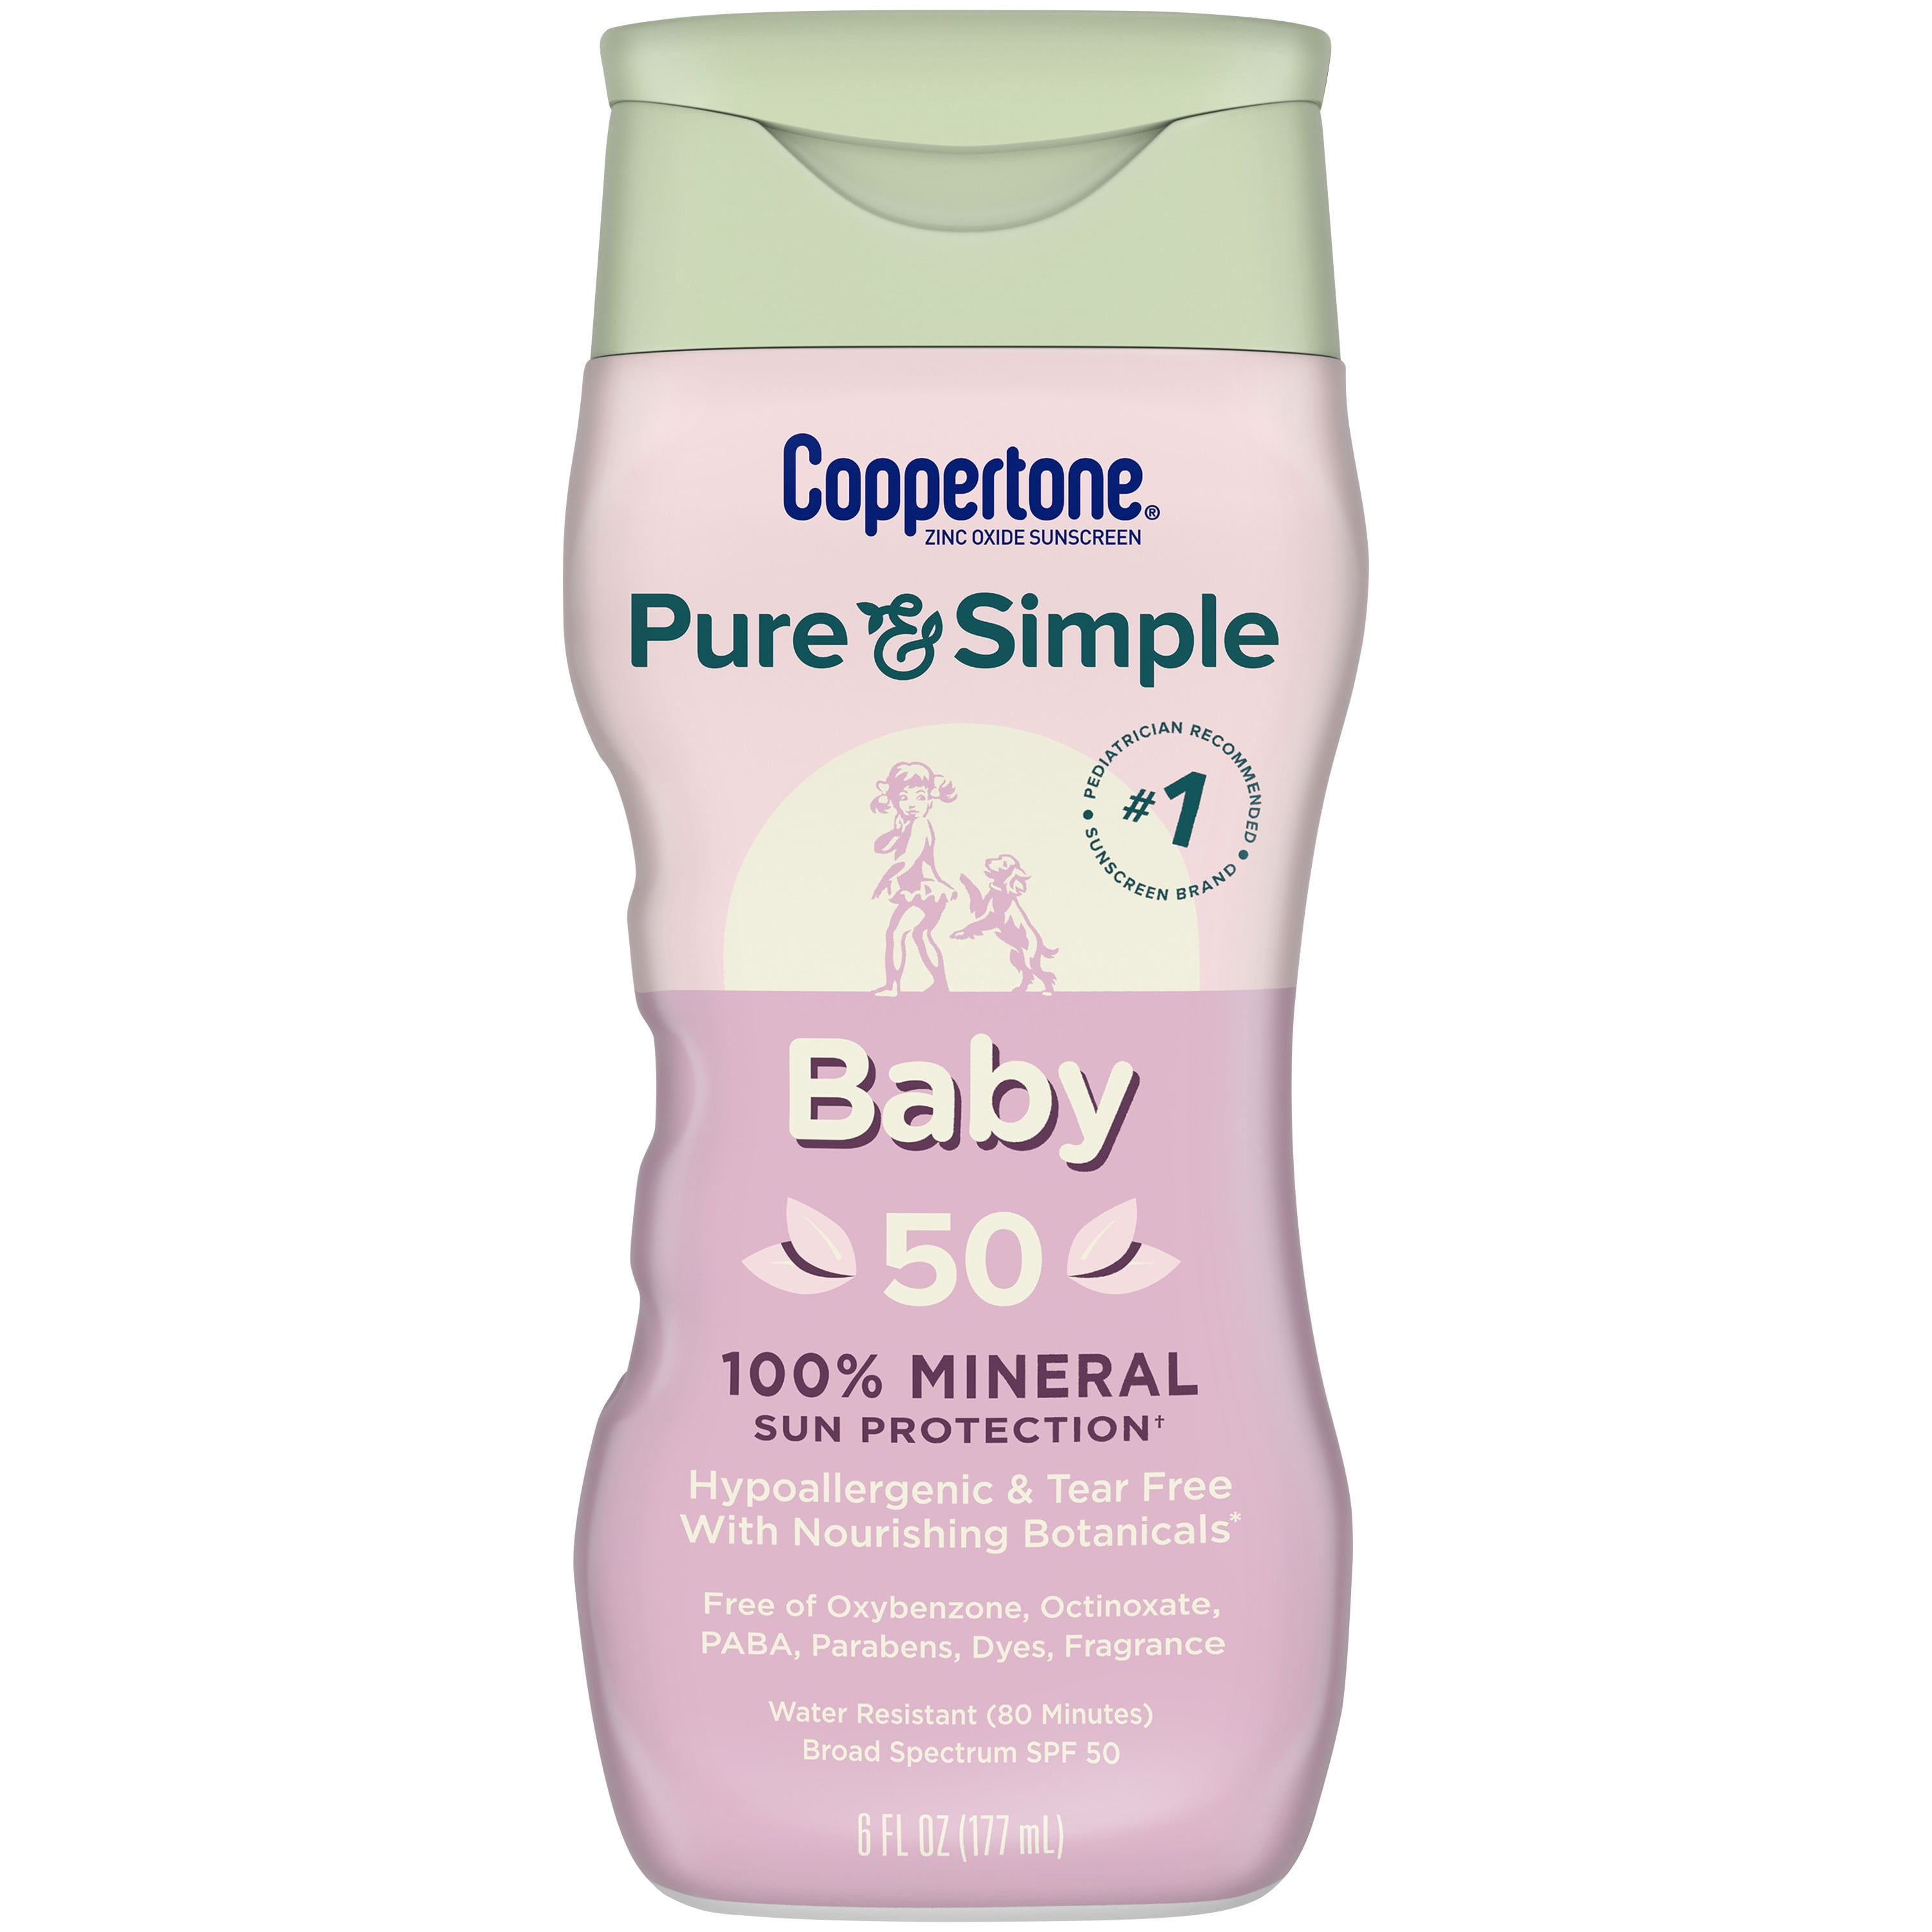 Pouponnettes & Bottom Cream for Baby by H2O at Home - Motherhood Defined